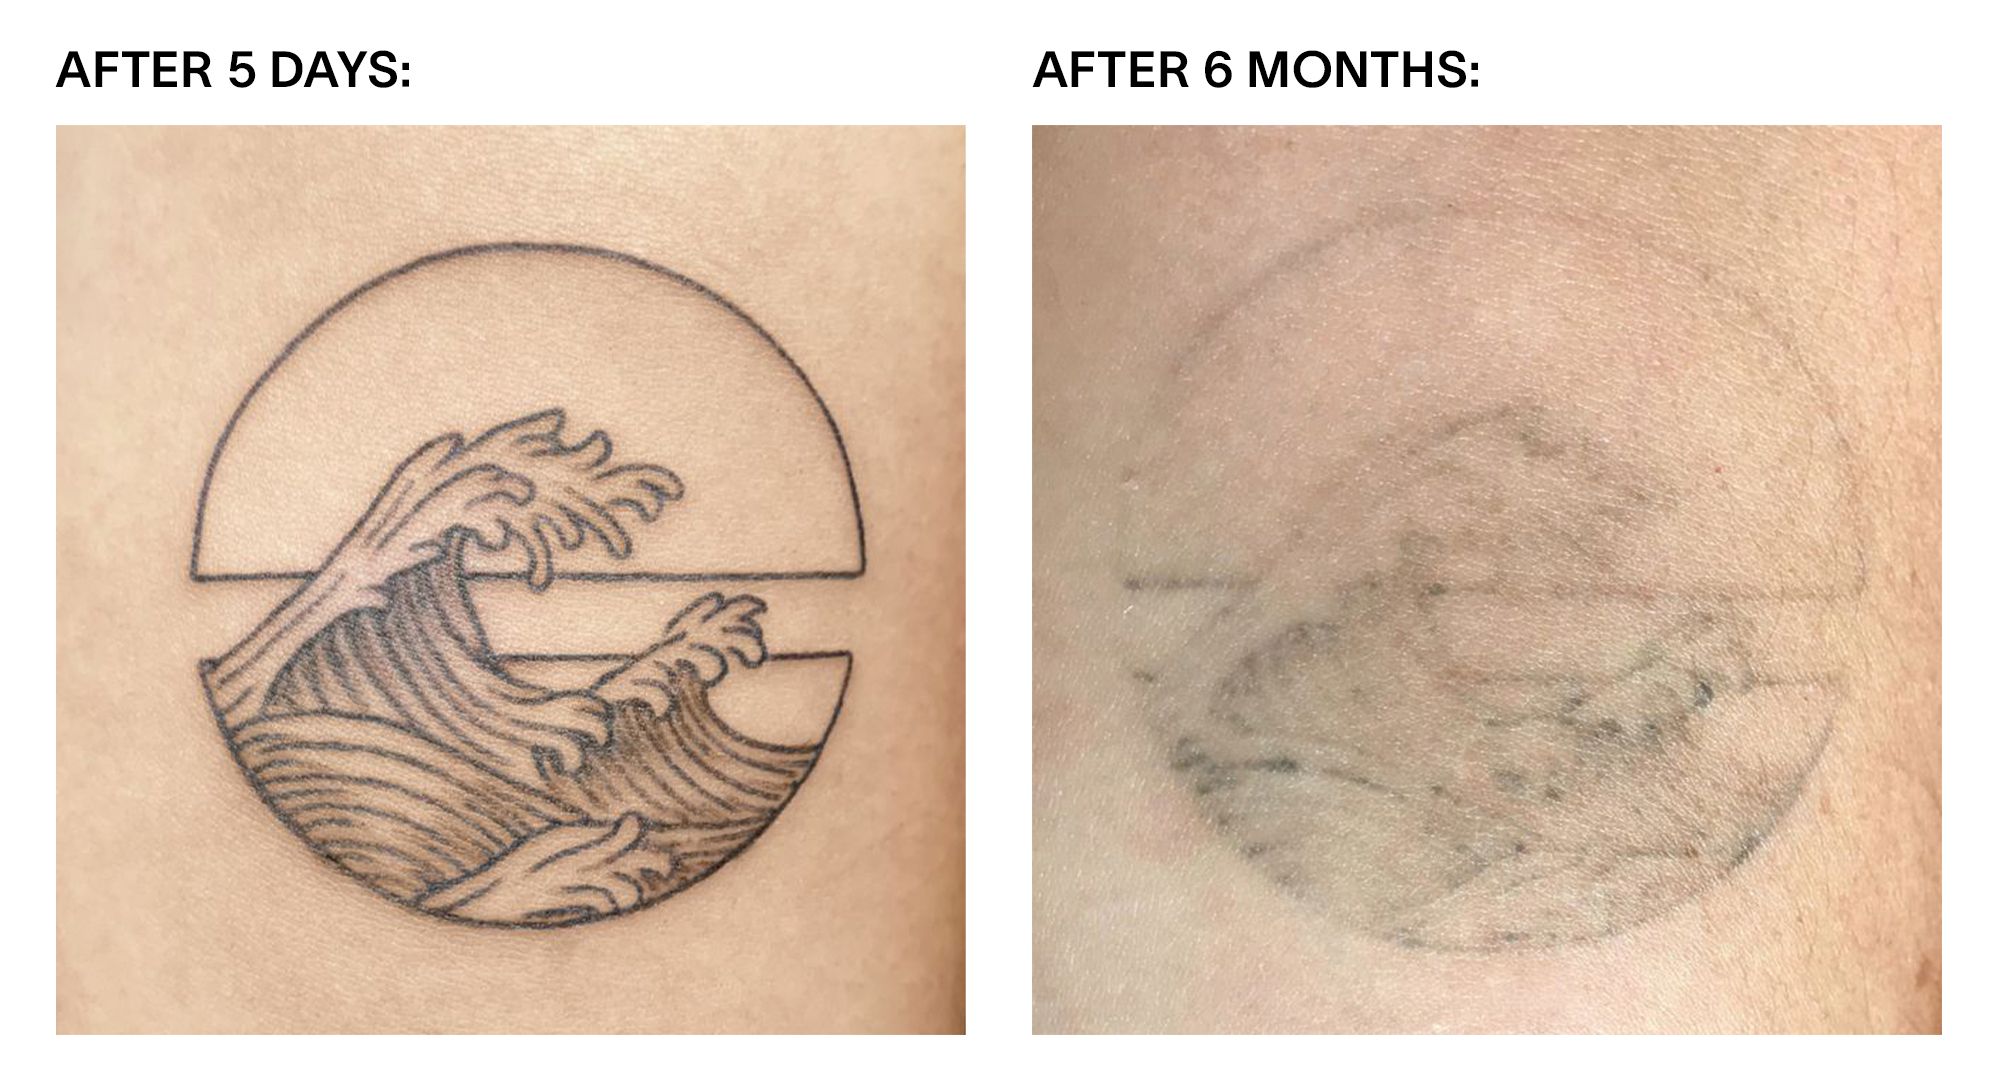 Are Made-to-Fade Tattoos the Future of Body Art?